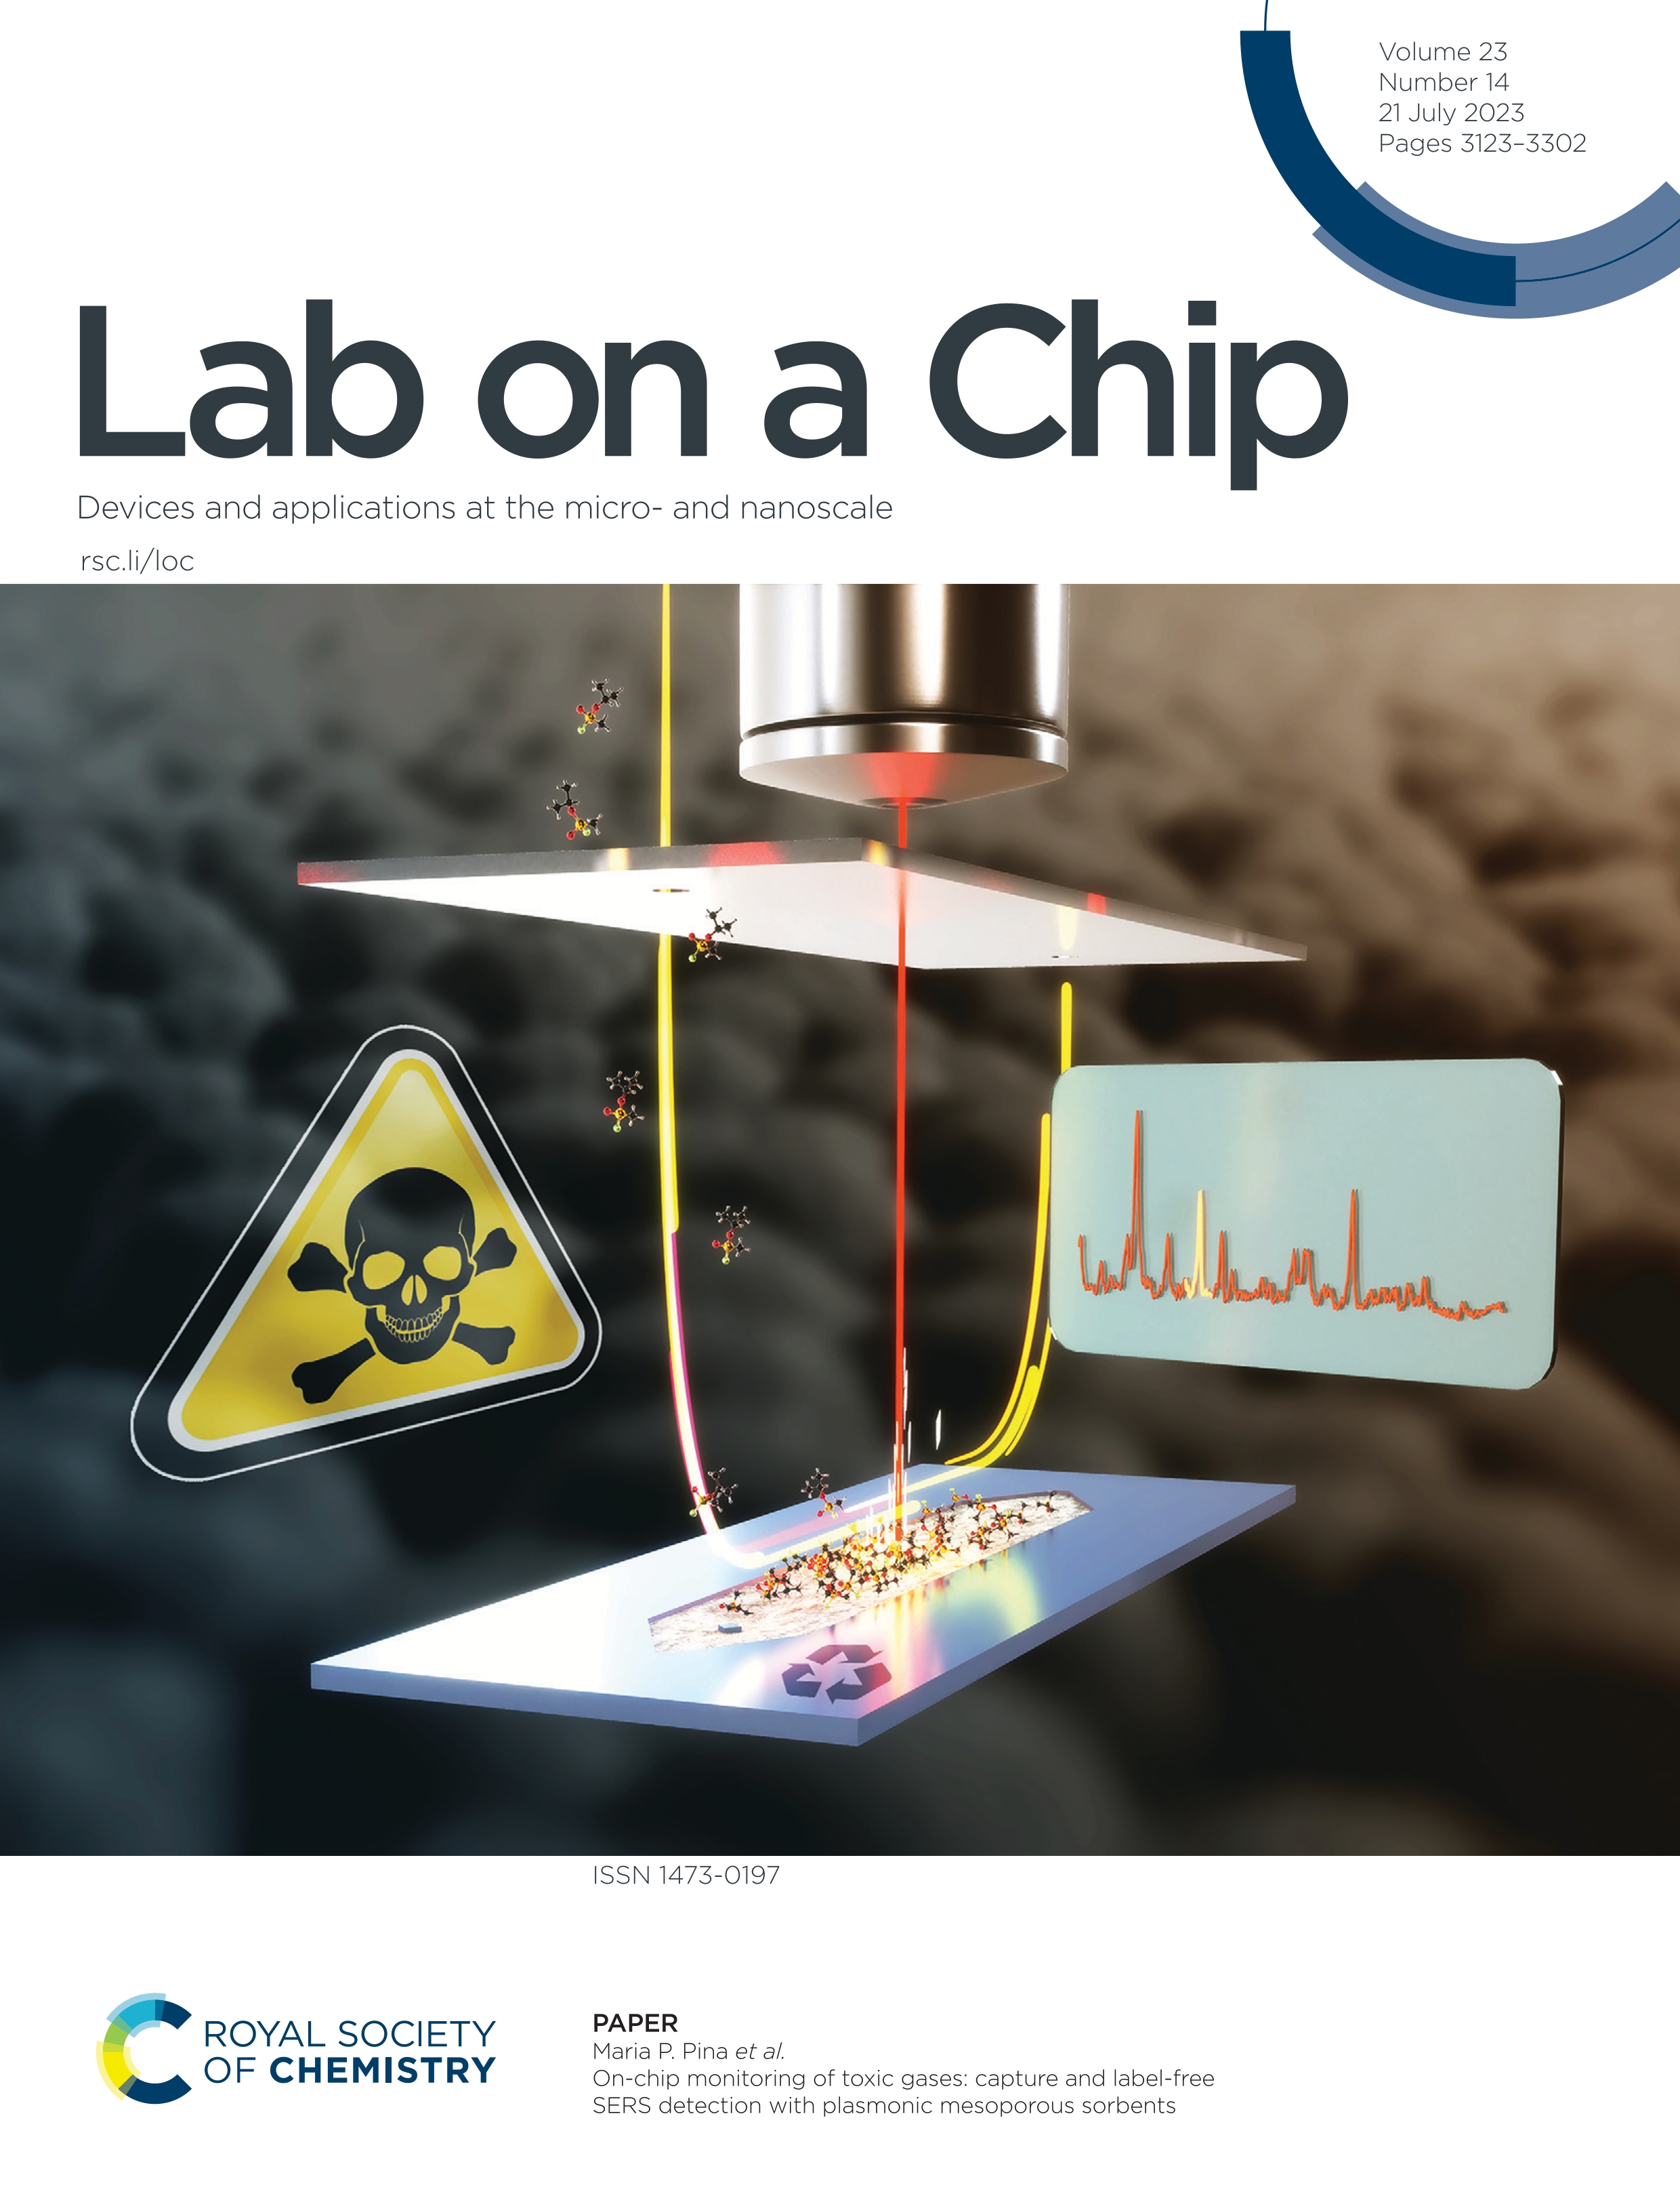 On-chip monitoring of toxic gases: capture and label-free SERS detection with plasmonic mesoporous sorbents